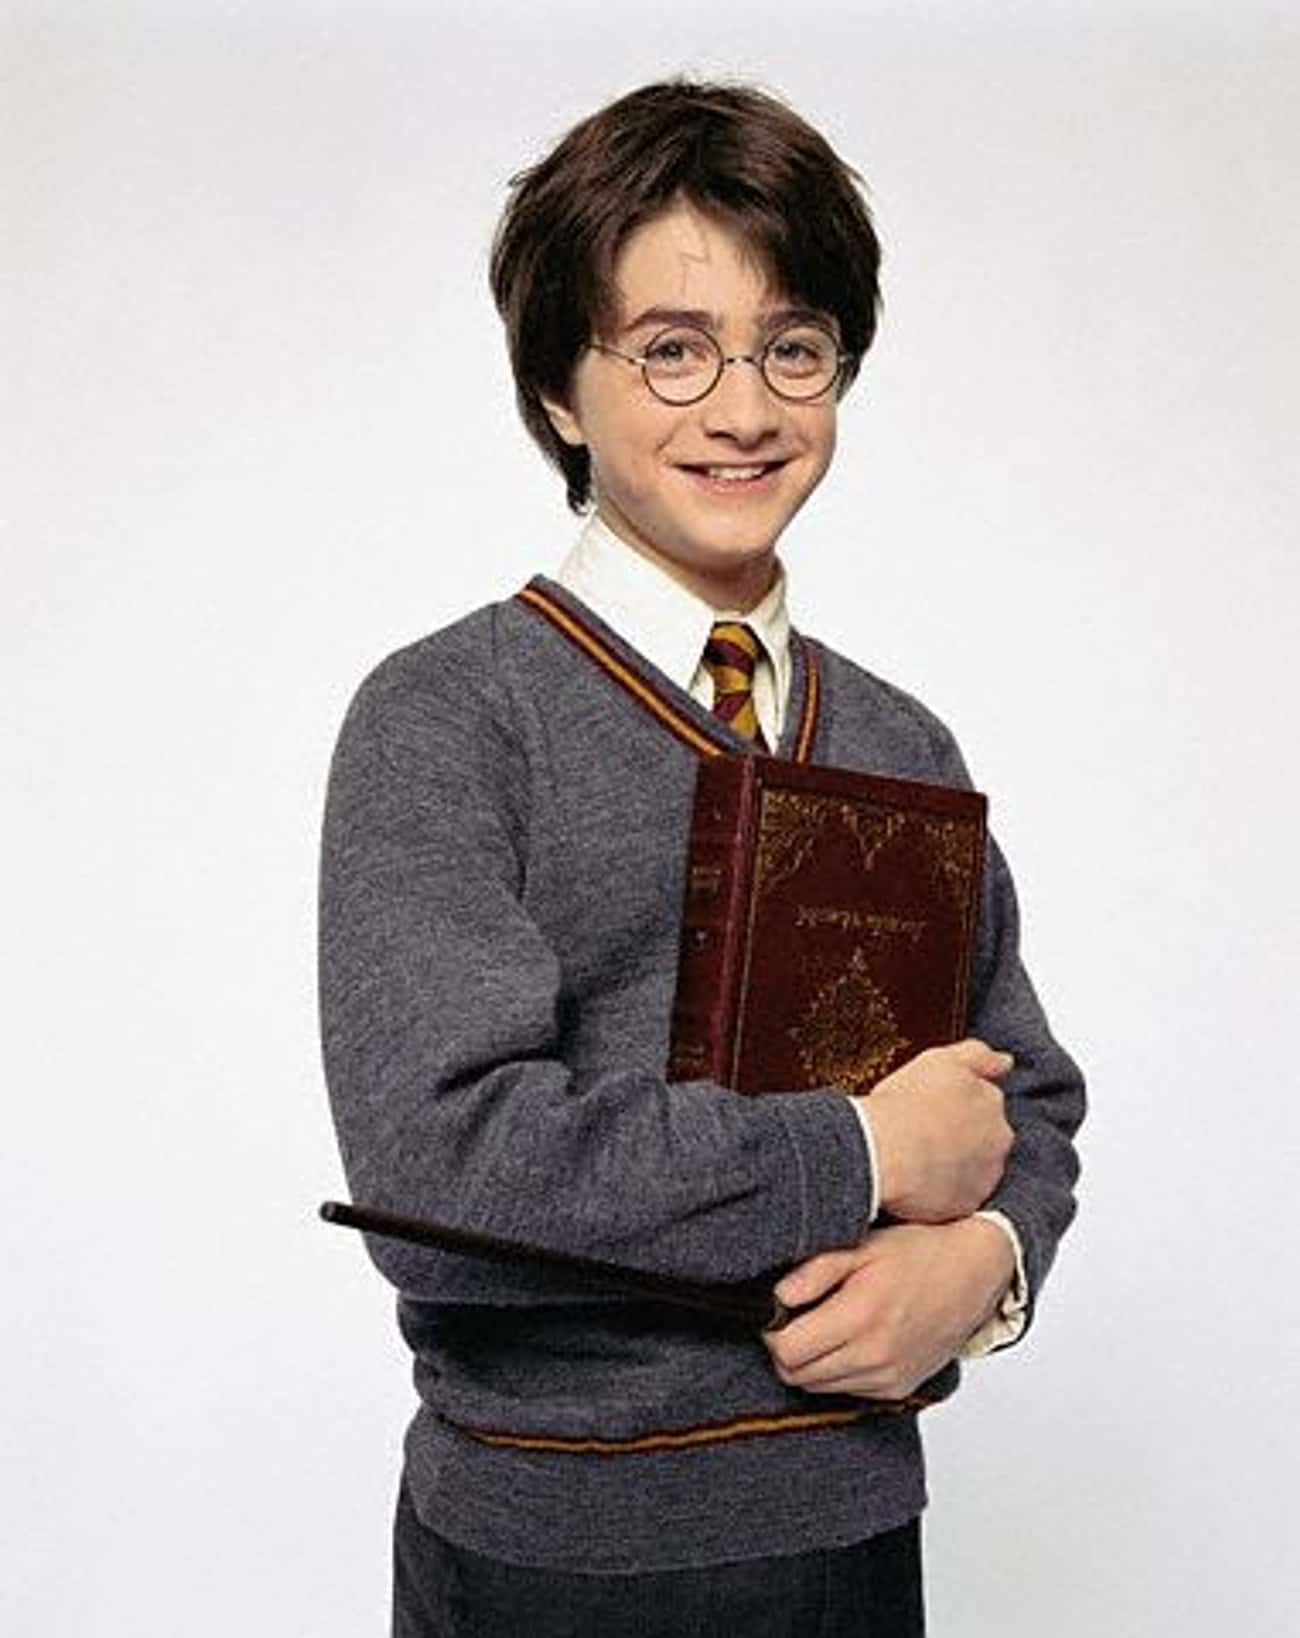 Daniel Radcliffe in Knitted Studious Jumper